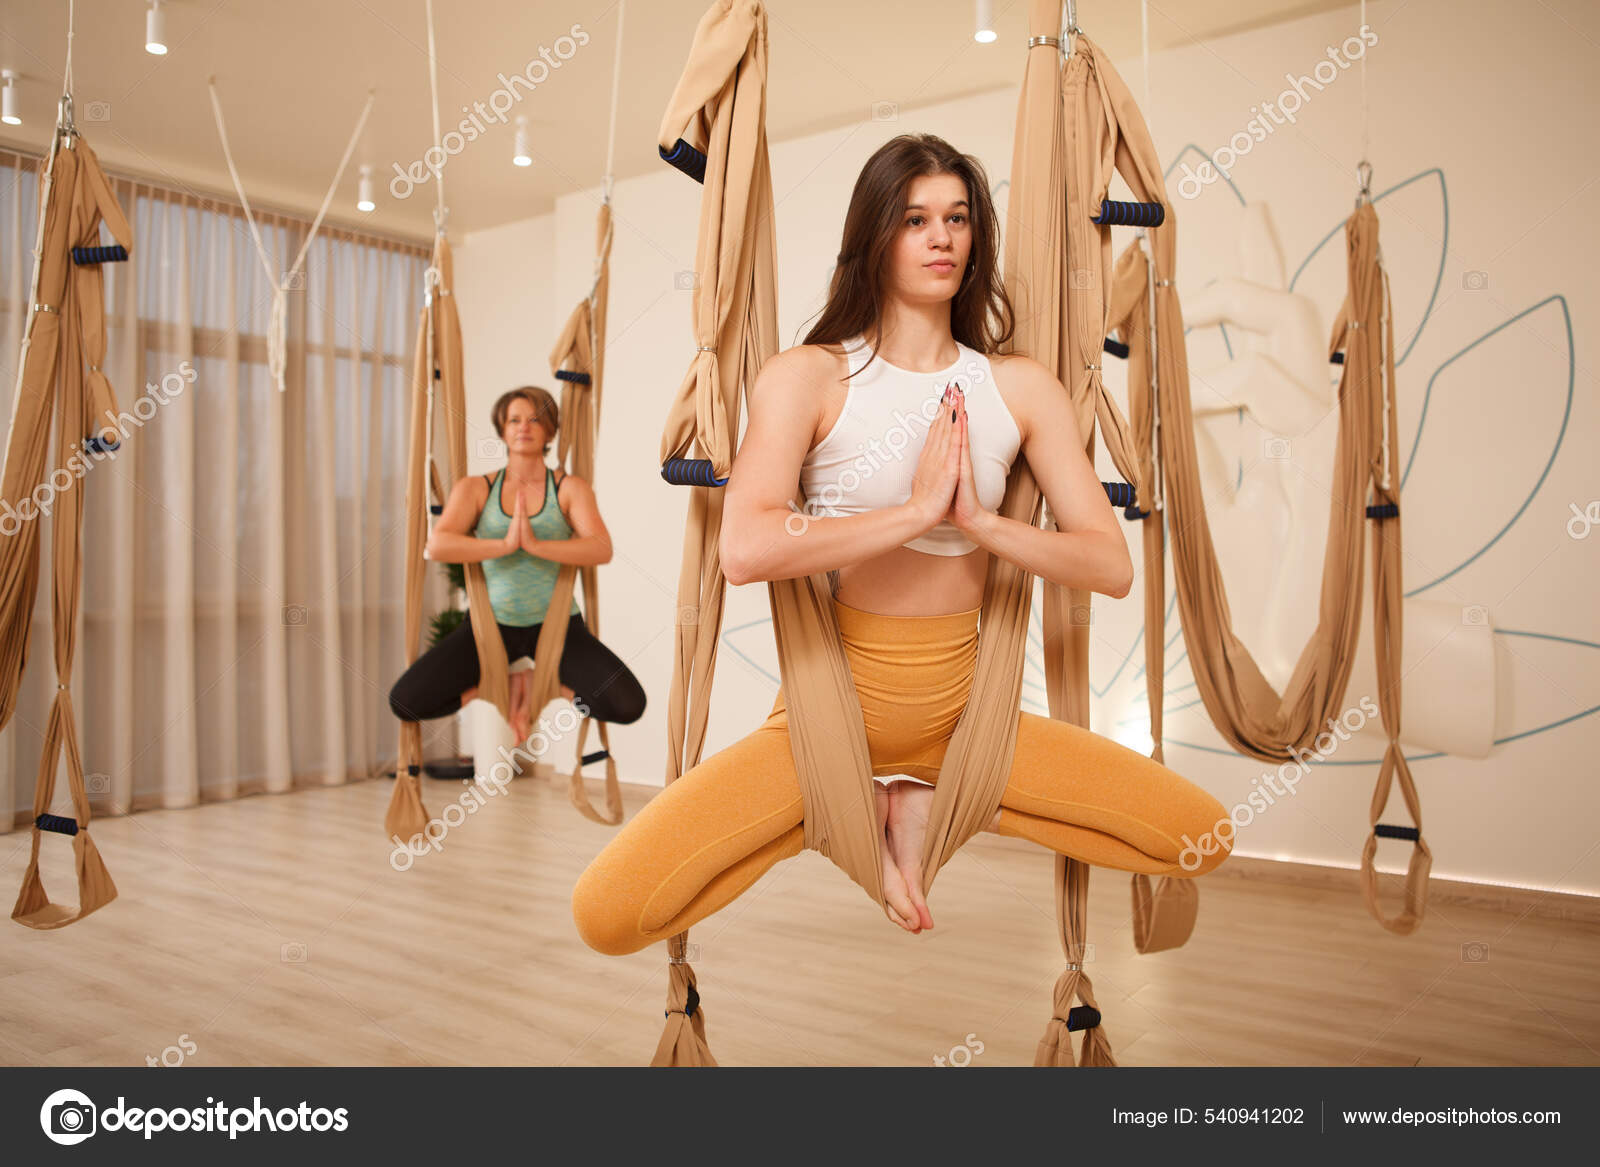 Premium Photo | Pregnant girl a woman does yoga on a hammock in the gym the  concept of a healthy lifestyle motherhood